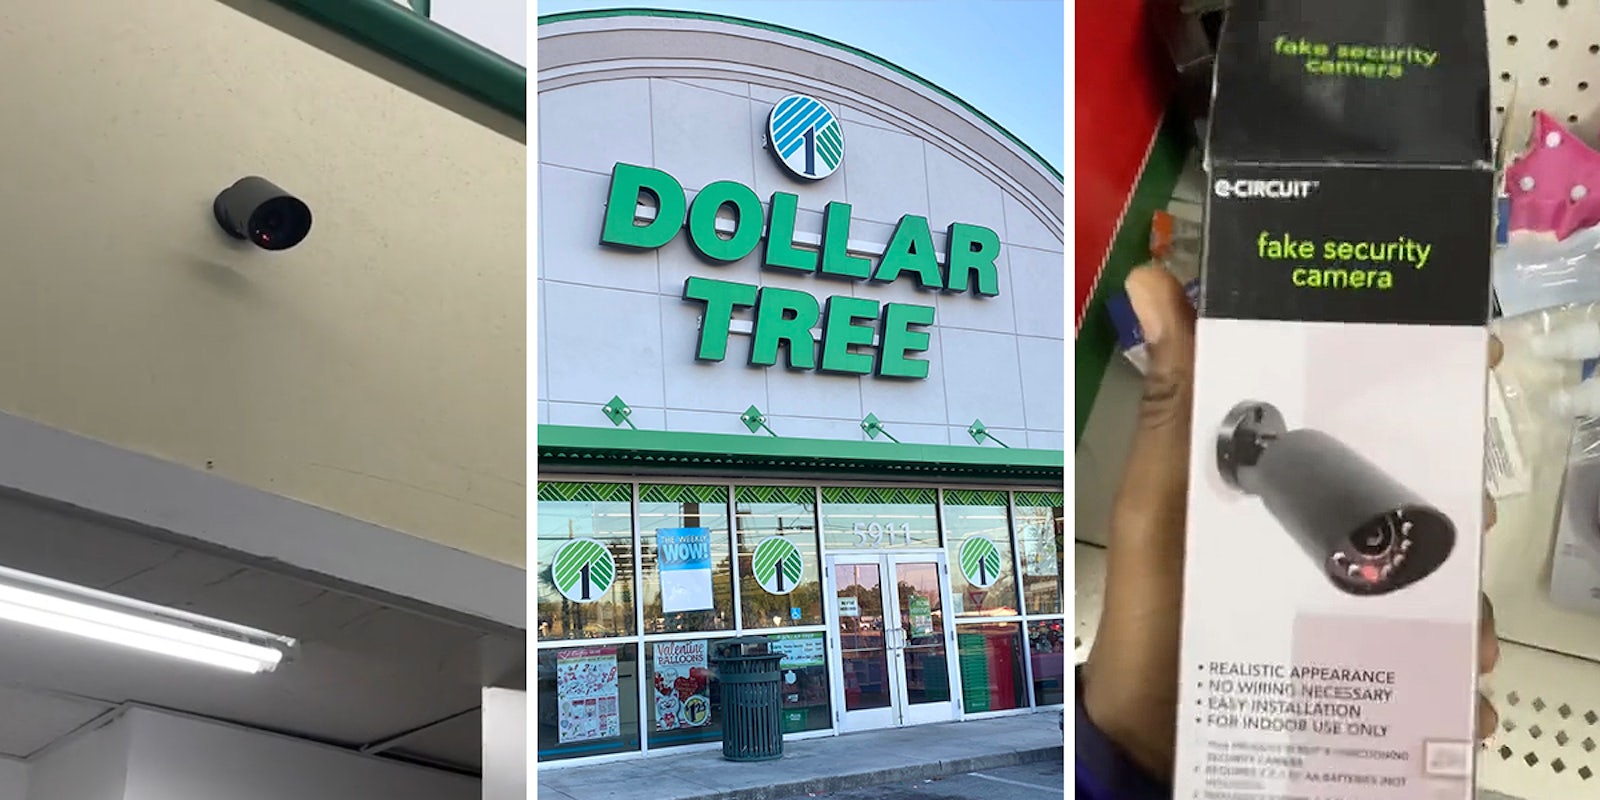 Dollar Tree security camera on wall (l) Dollar Tree building with sign (c) Dollar Tree fake security camera open box (r)